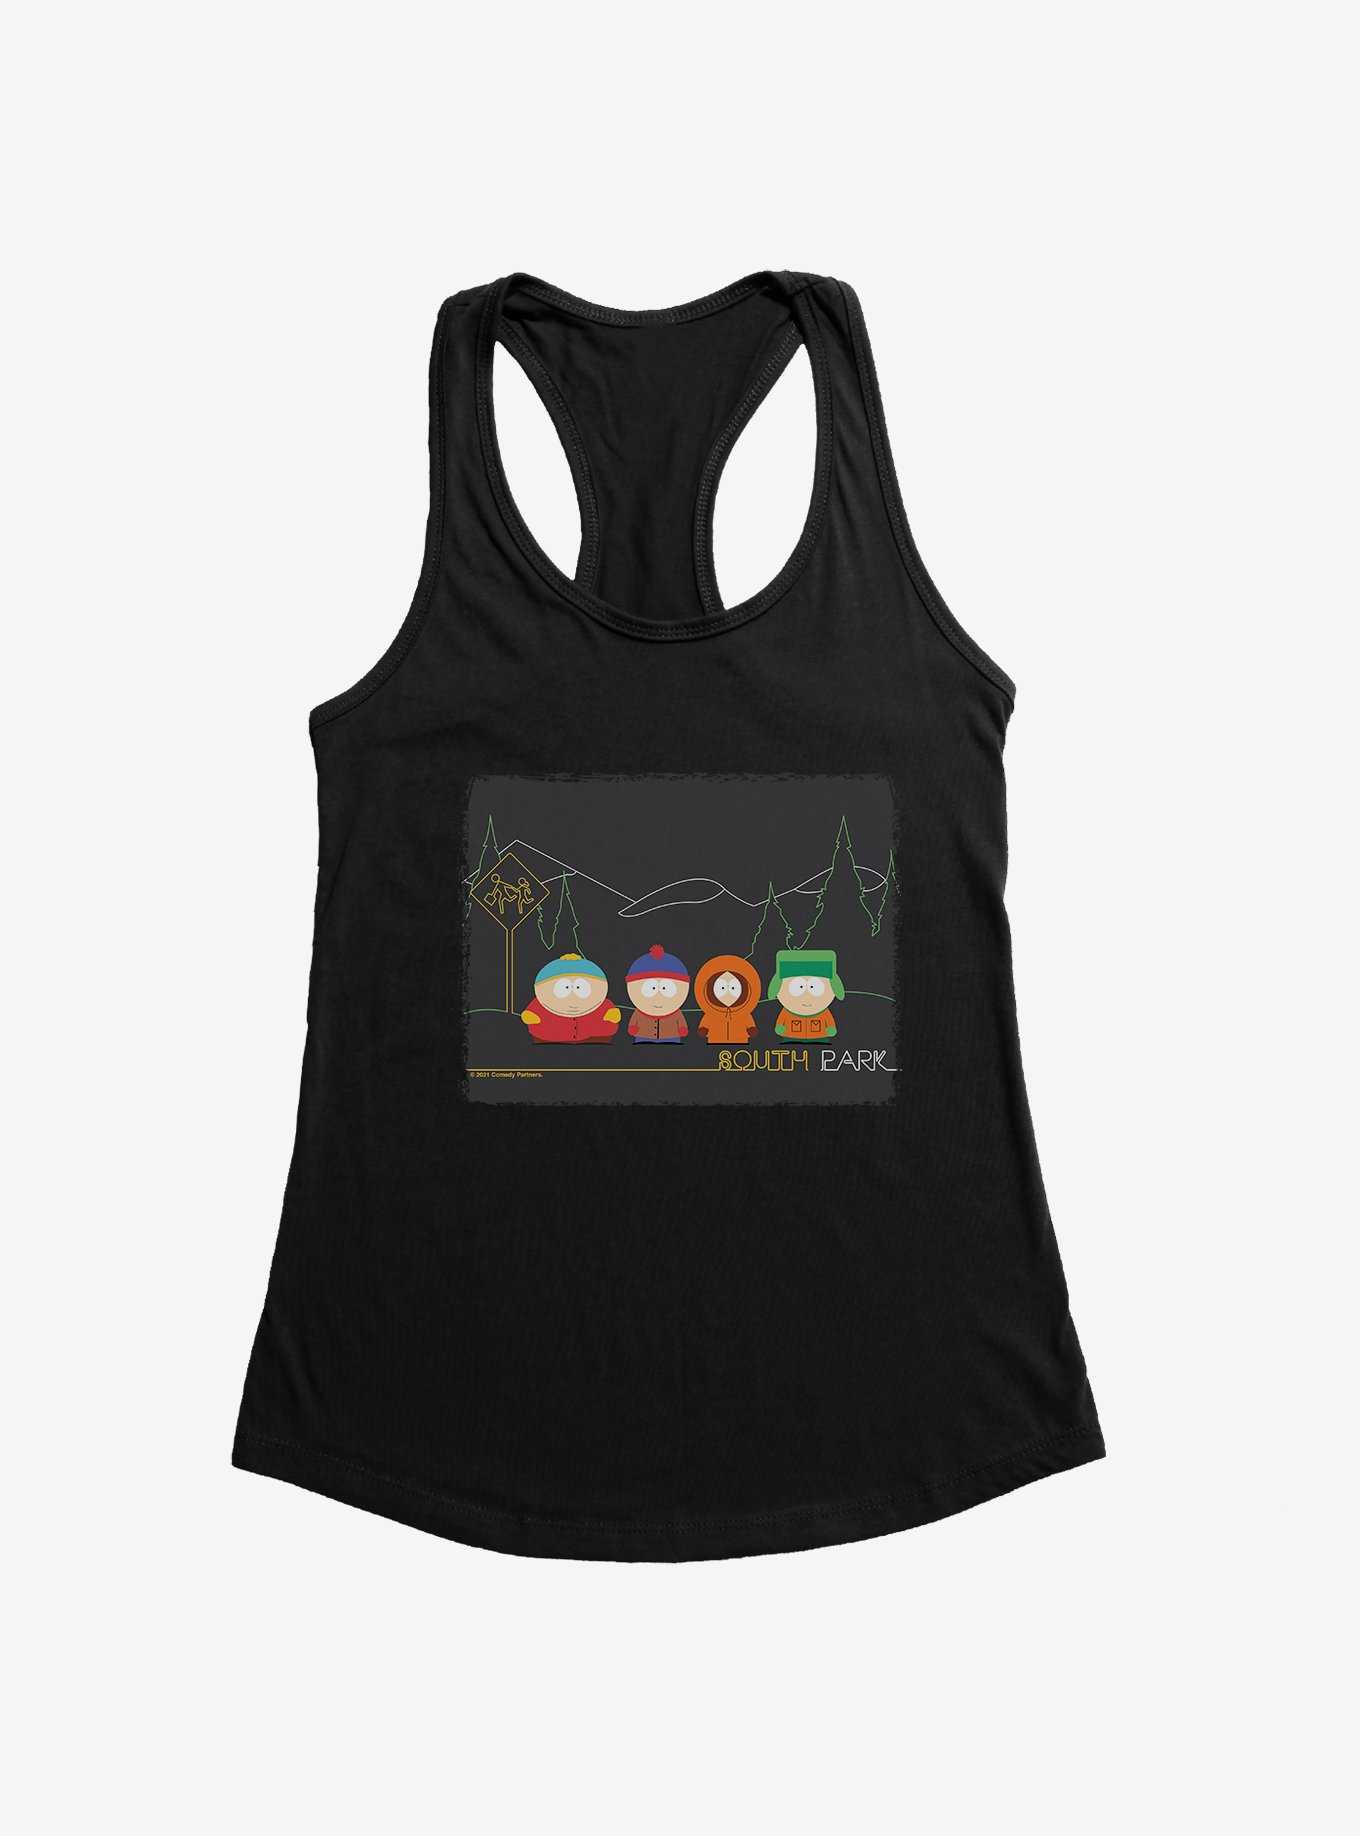 South Park Sketch Opening Womens Tank Top, , hi-res